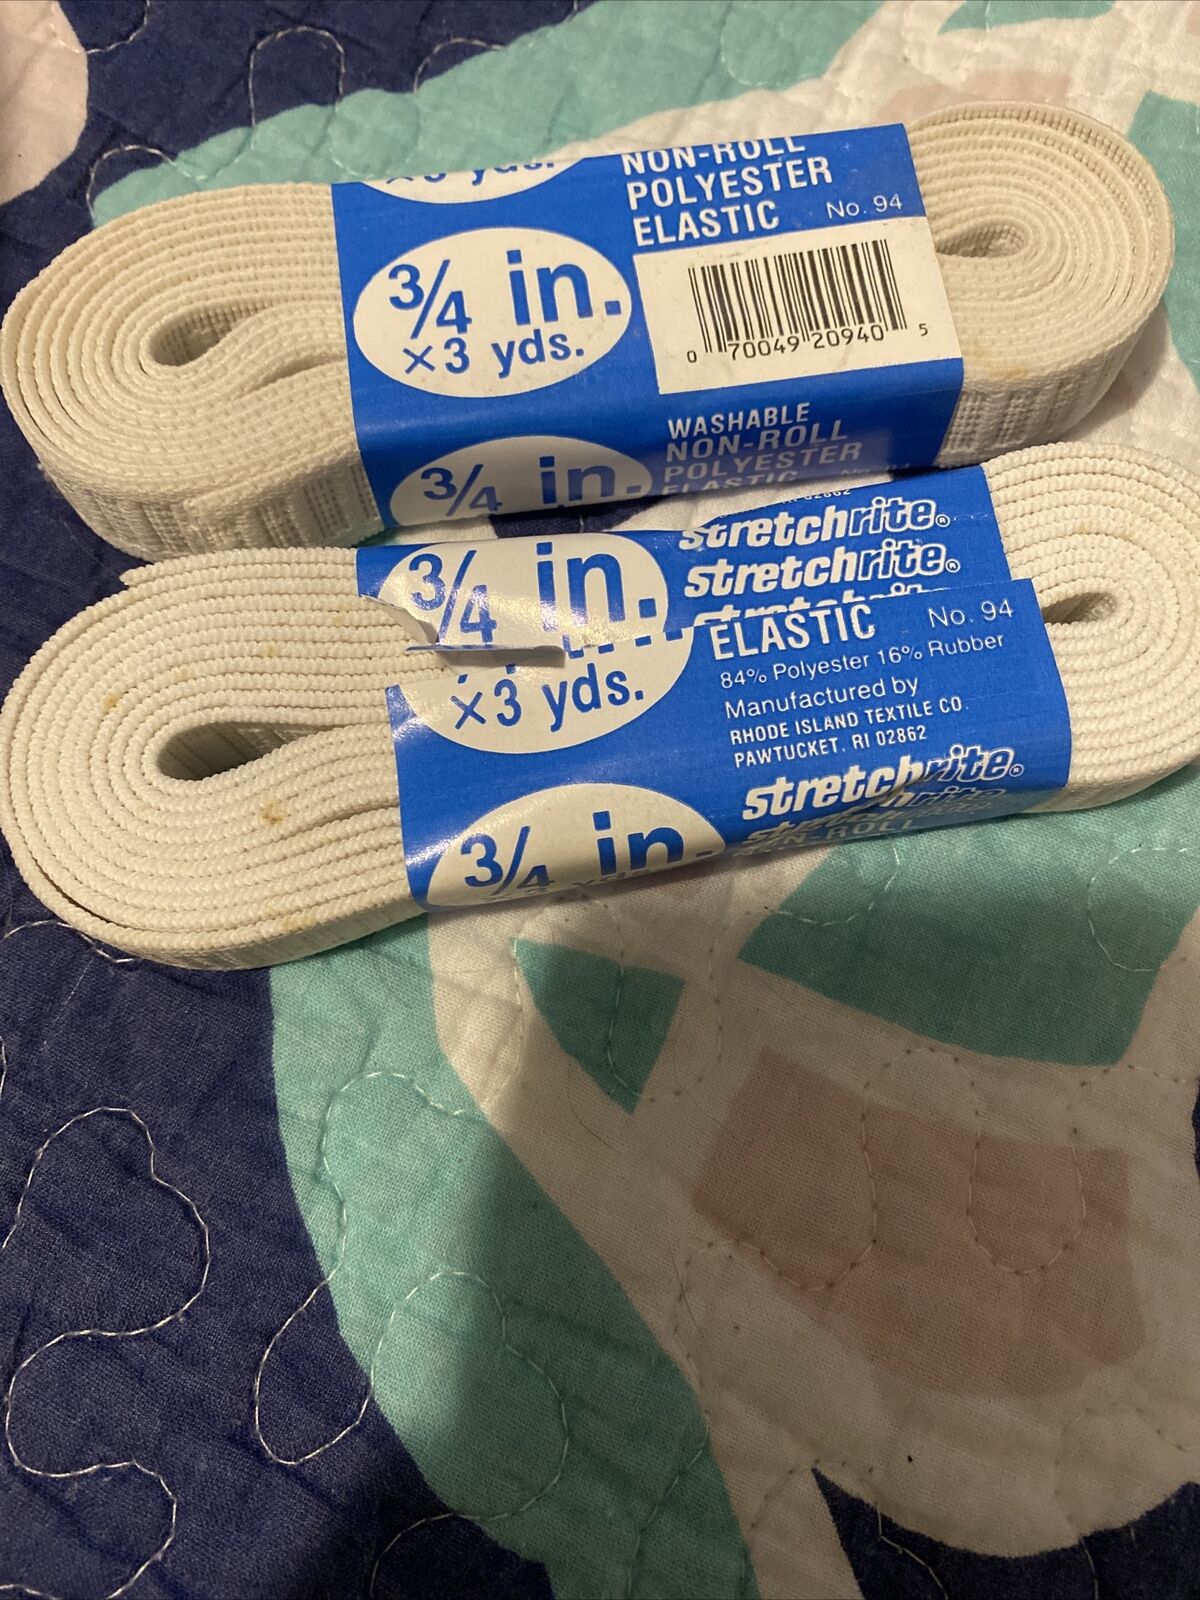 Stretchrite Elastic 3/4"w Non-roll Polyester -3 Yrd Packs X 3